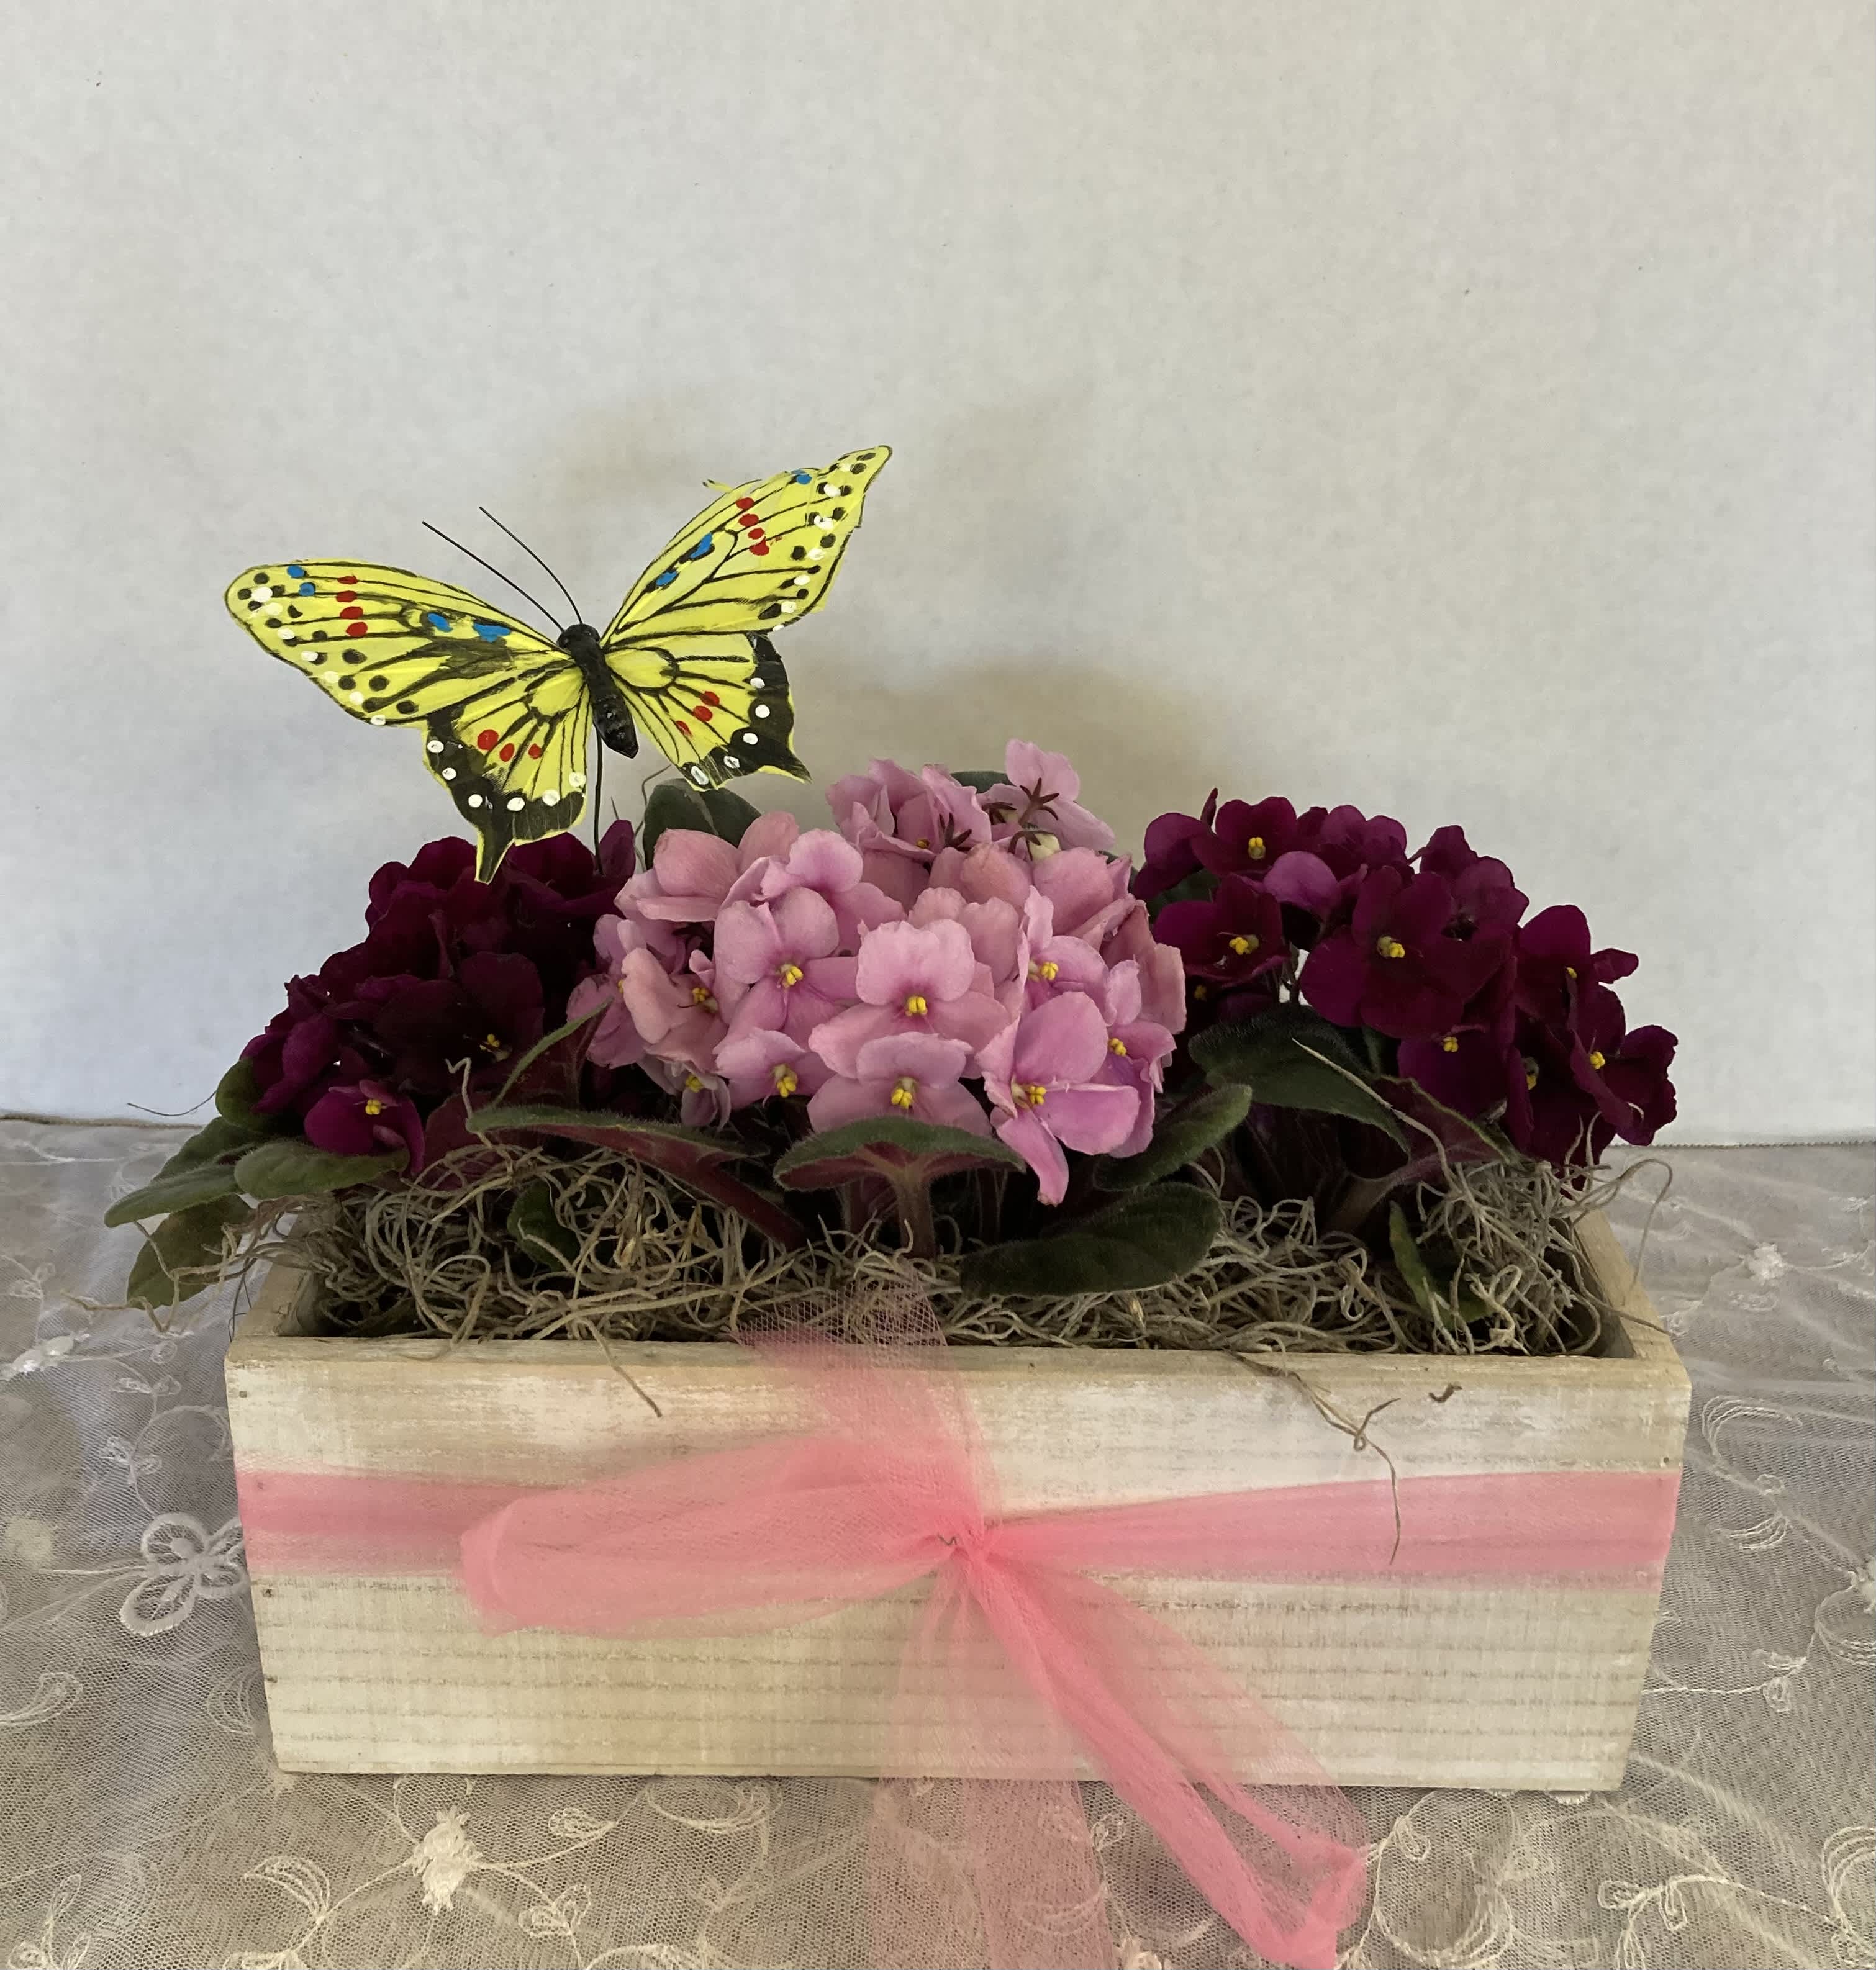 Violets!! - Sweet violet planter,  3 violets dressed with a butterfly in a wooden box.  Ideal for many occassions.   Available today for delivery or pick up